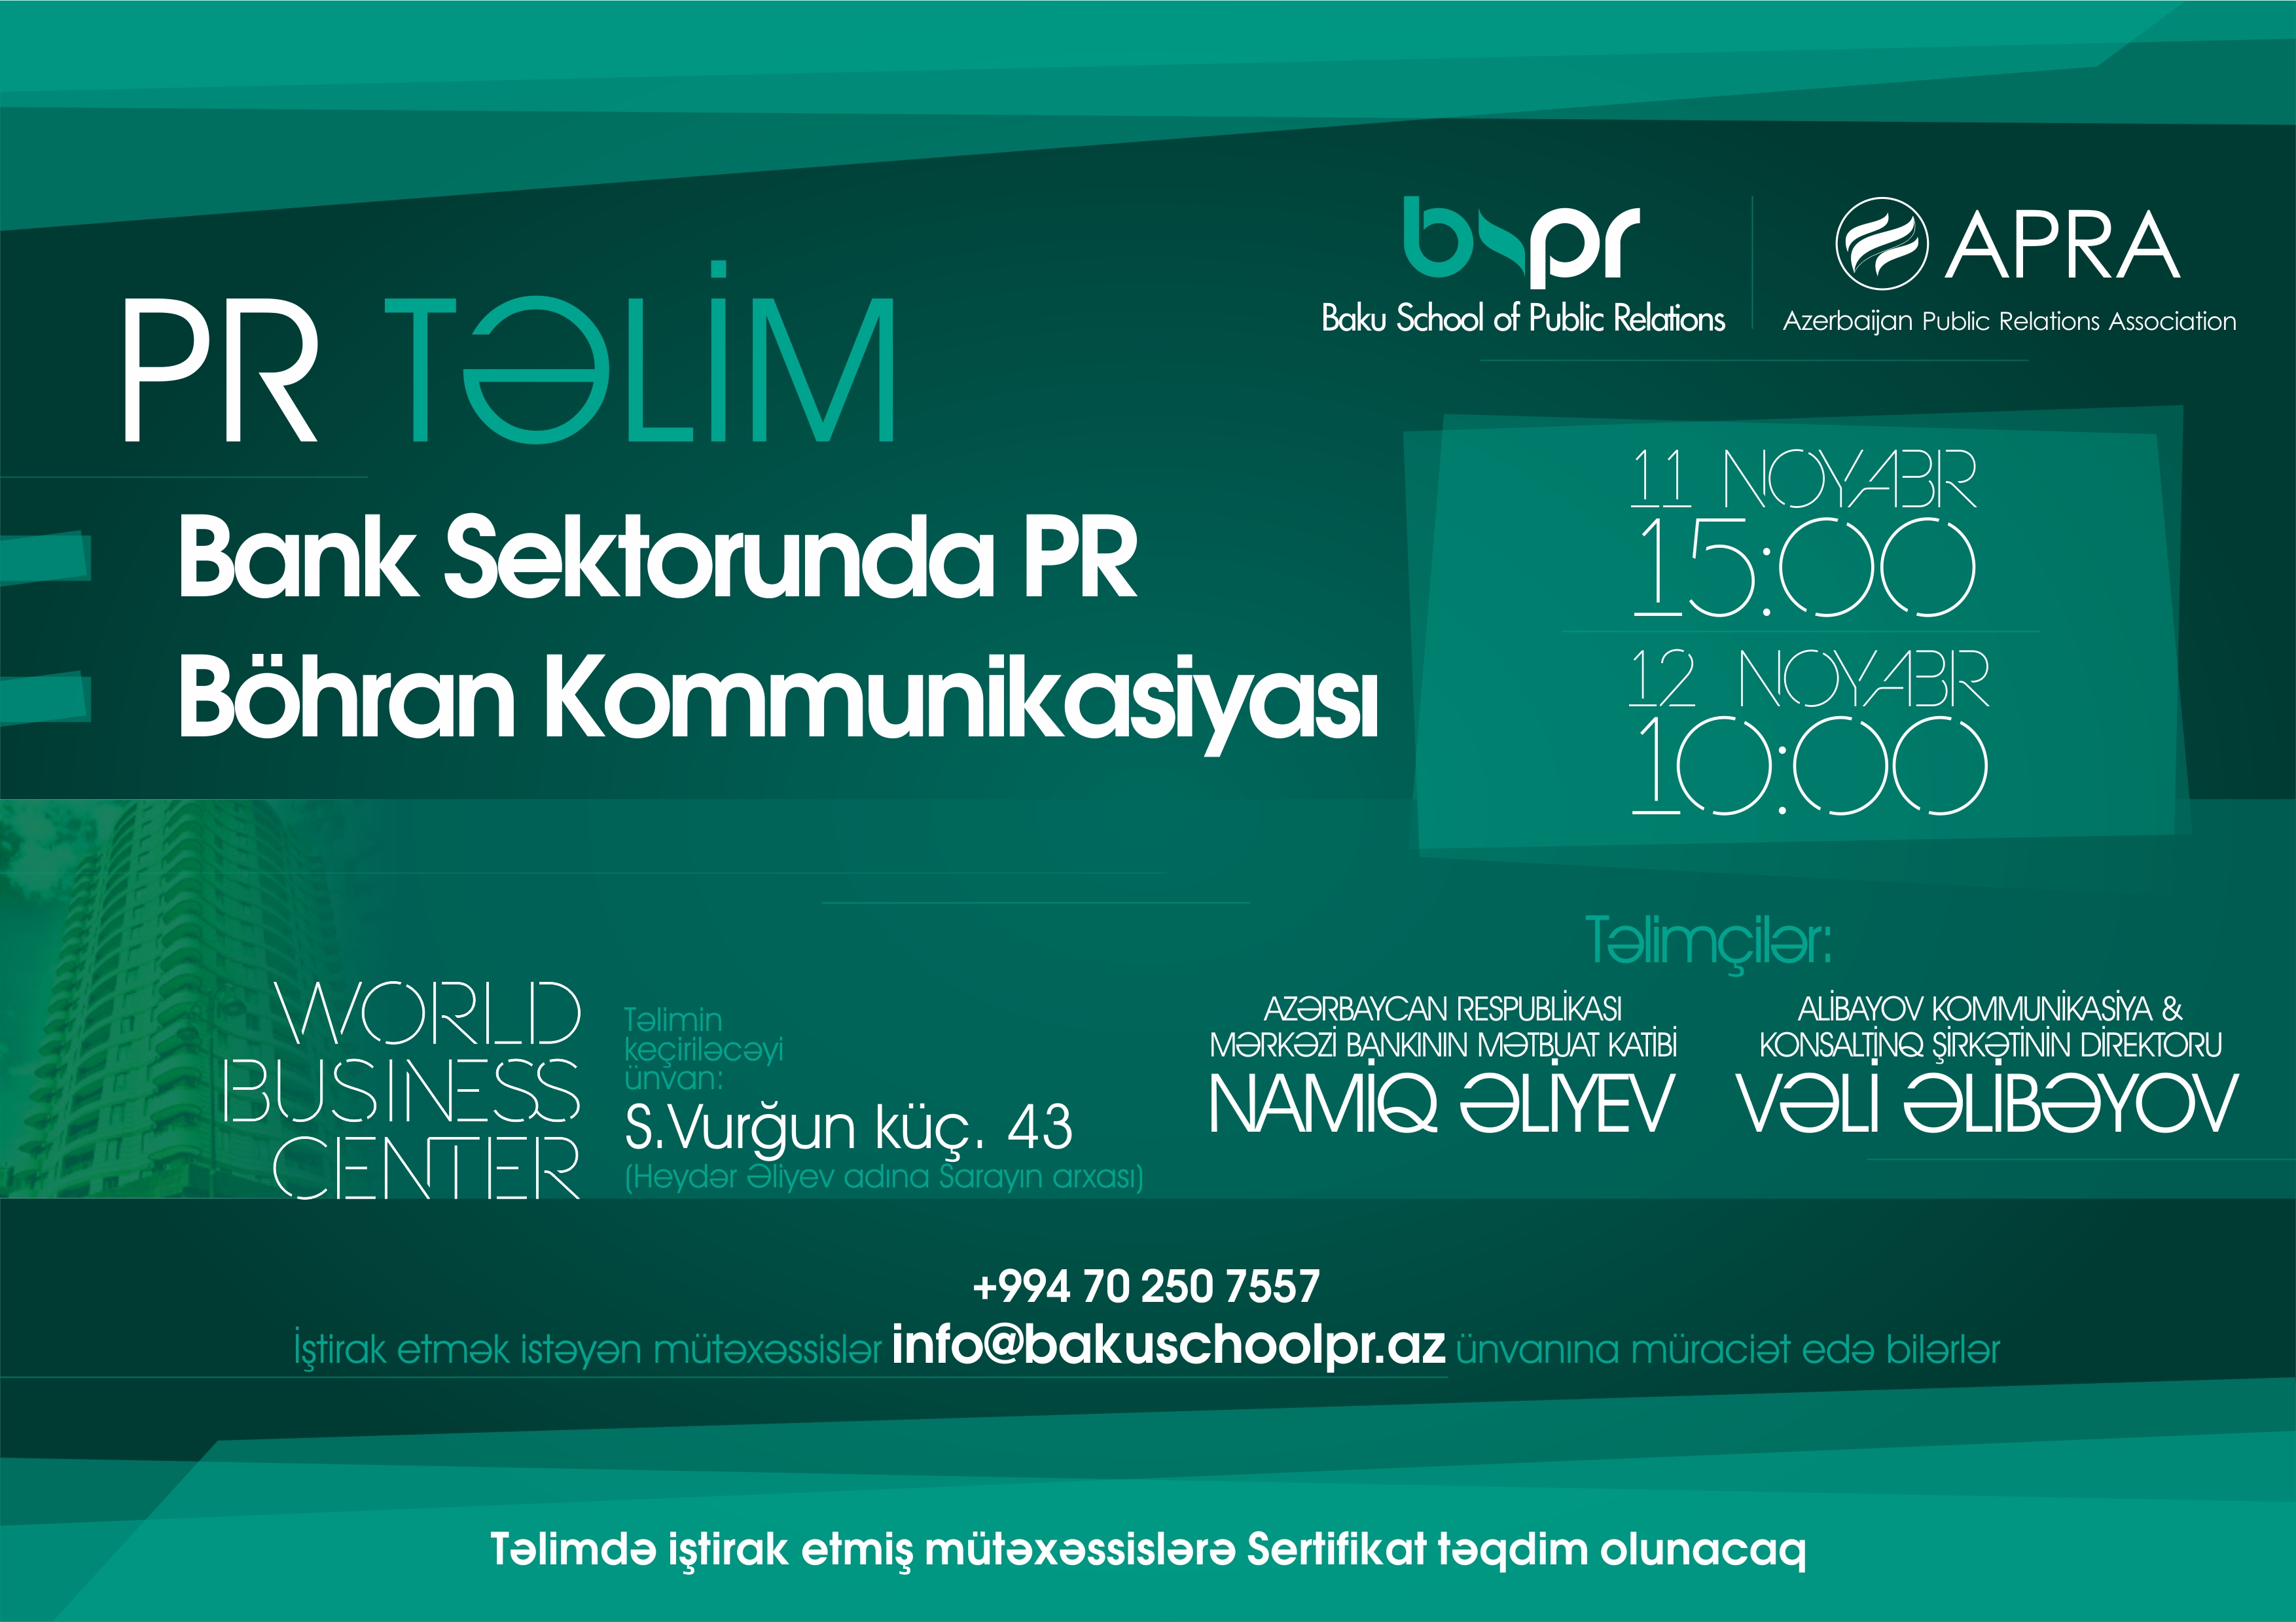 Trainings on “PR for banks” and “Crisis communications” to take place in Baku